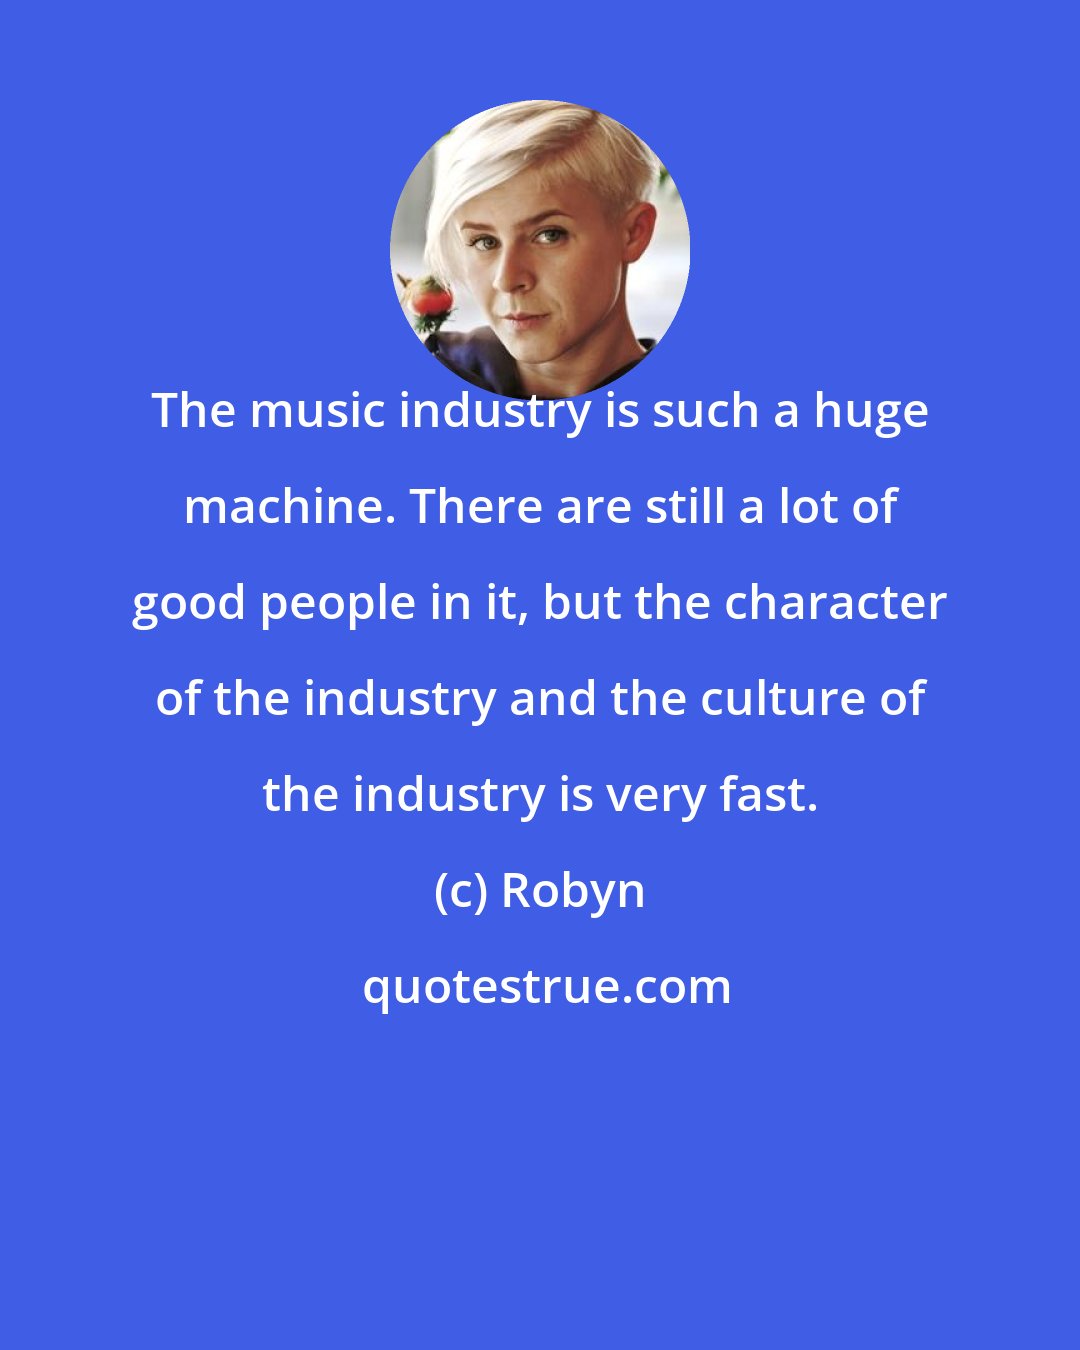 Robyn: The music industry is such a huge machine. There are still a lot of good people in it, but the character of the industry and the culture of the industry is very fast.